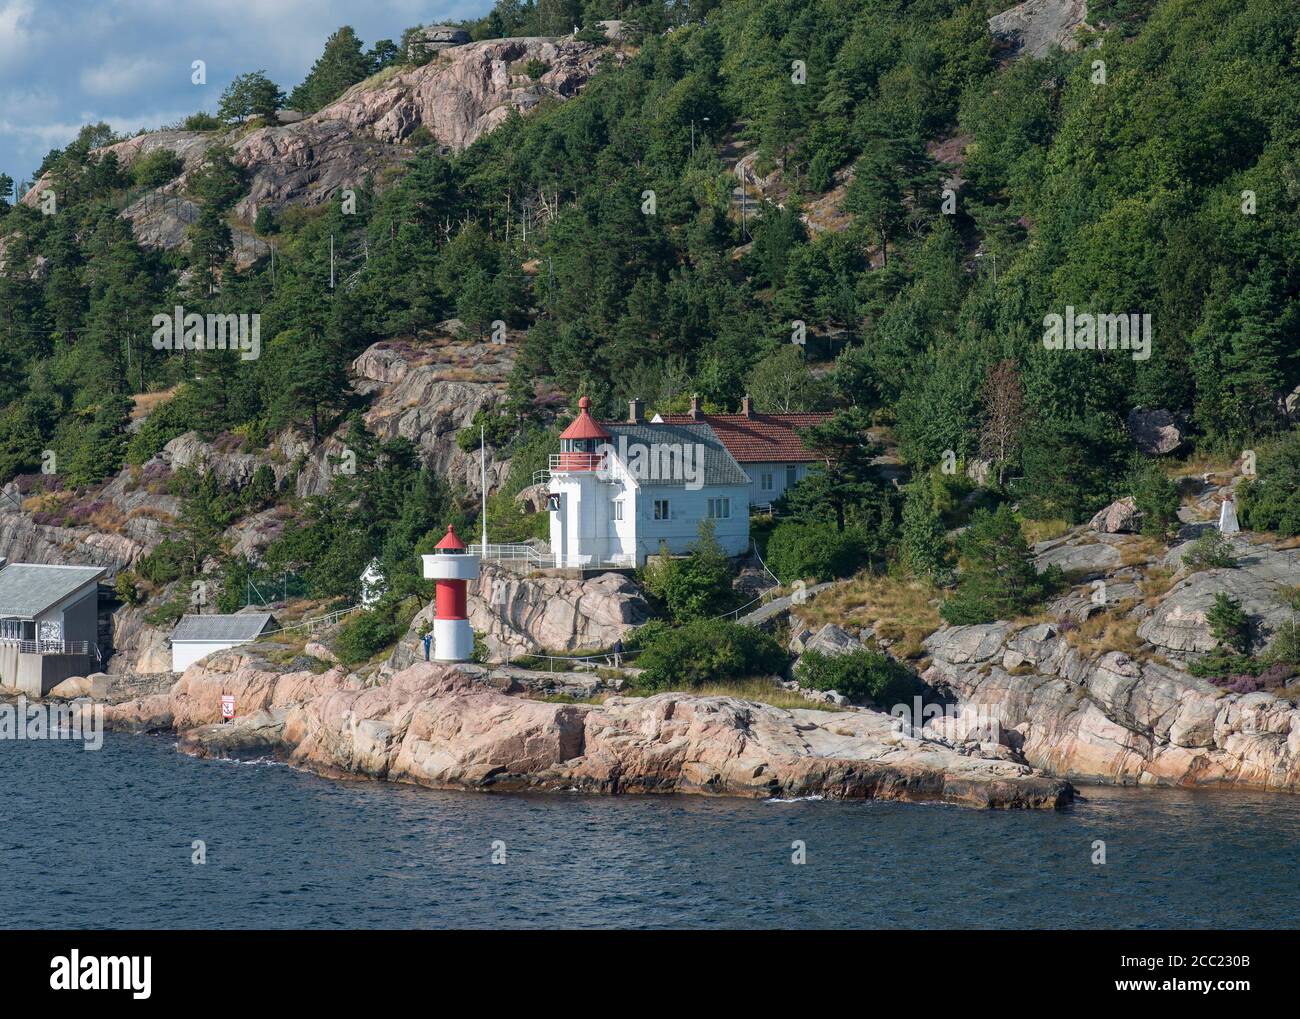 Norway, Museum and lighthouse at harbor Stock Photo